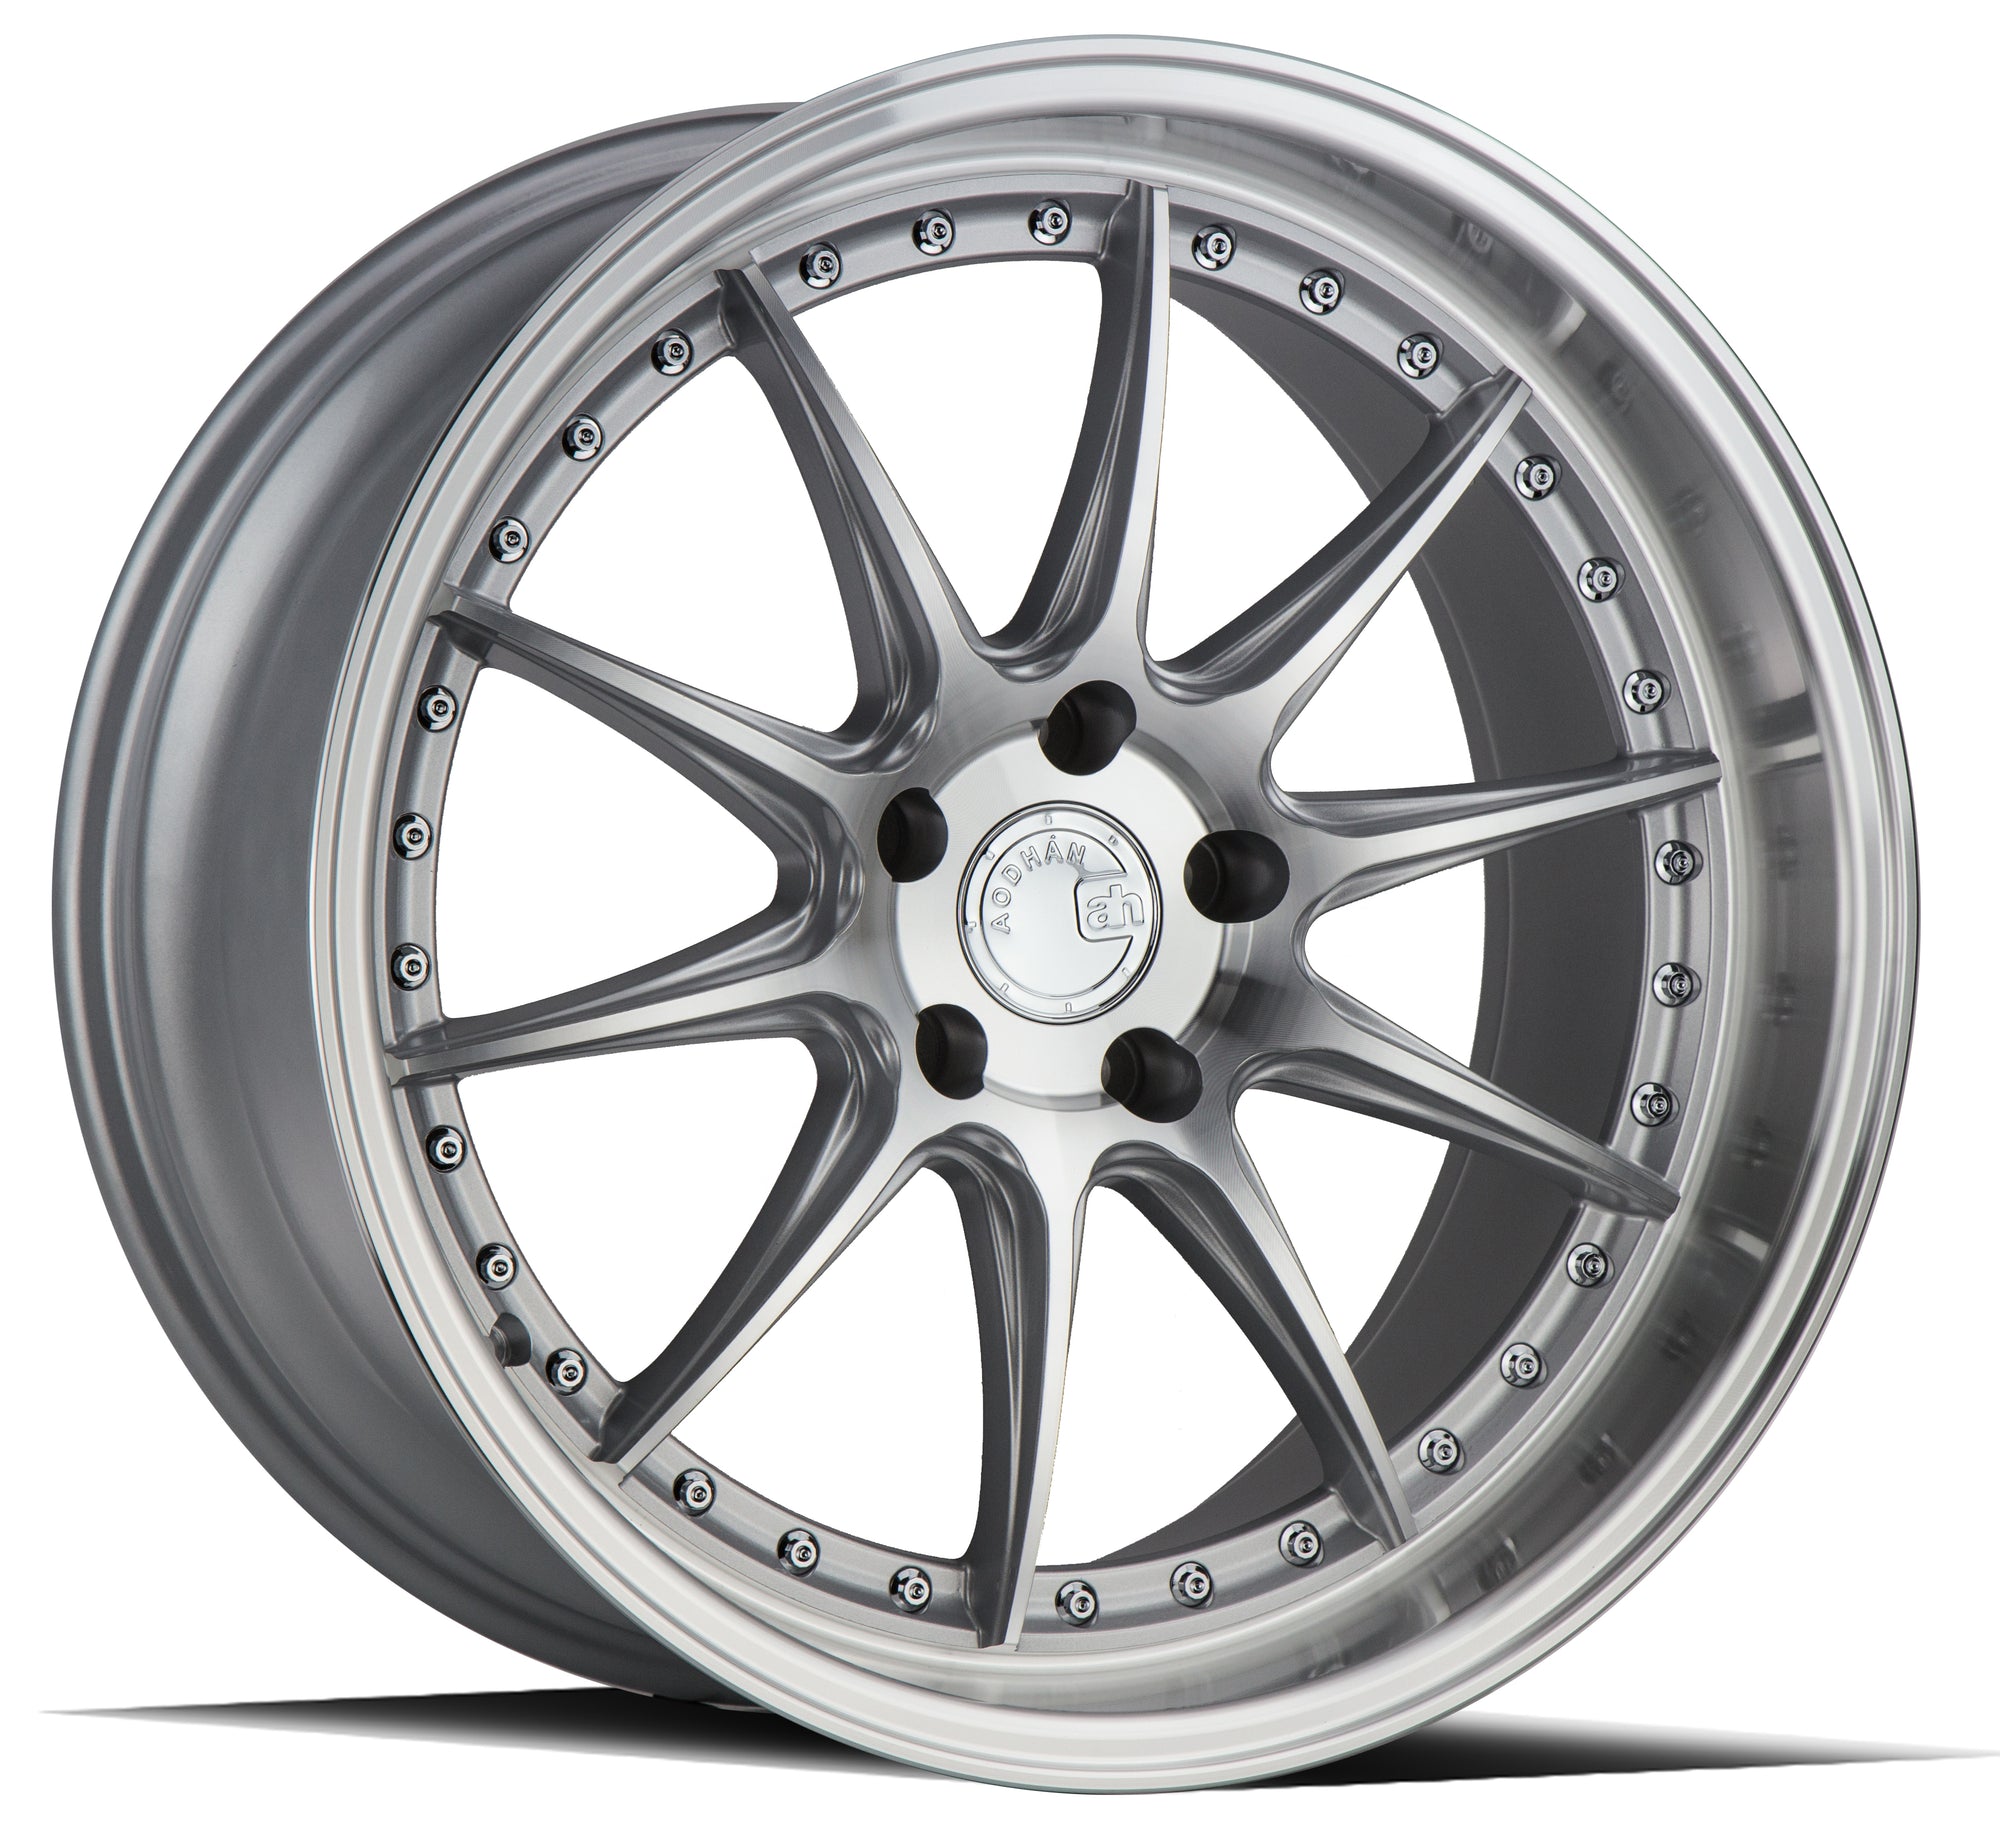 Aodhan DS07 19x9.5 5x114.3 +15 Silver w/Machined Face